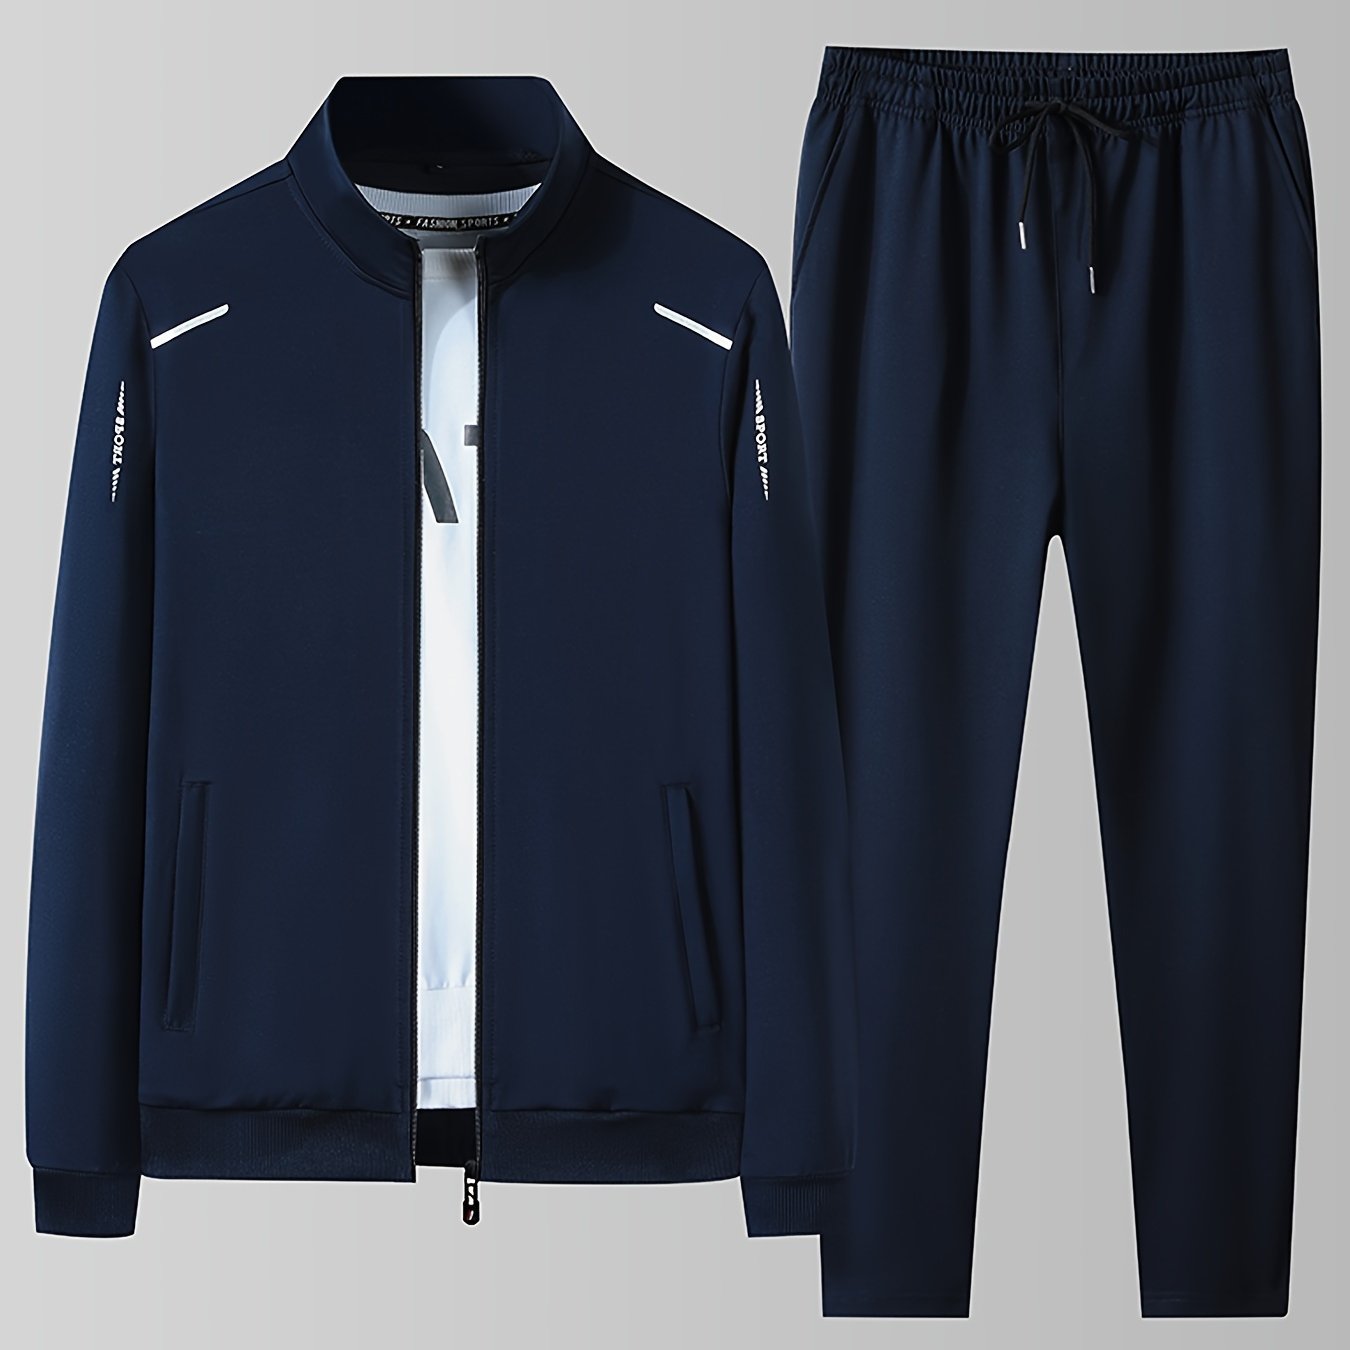 Fleece men's athletic tracksuit in solid color with stretch fabric and pockets, ideal for sports and casual wear